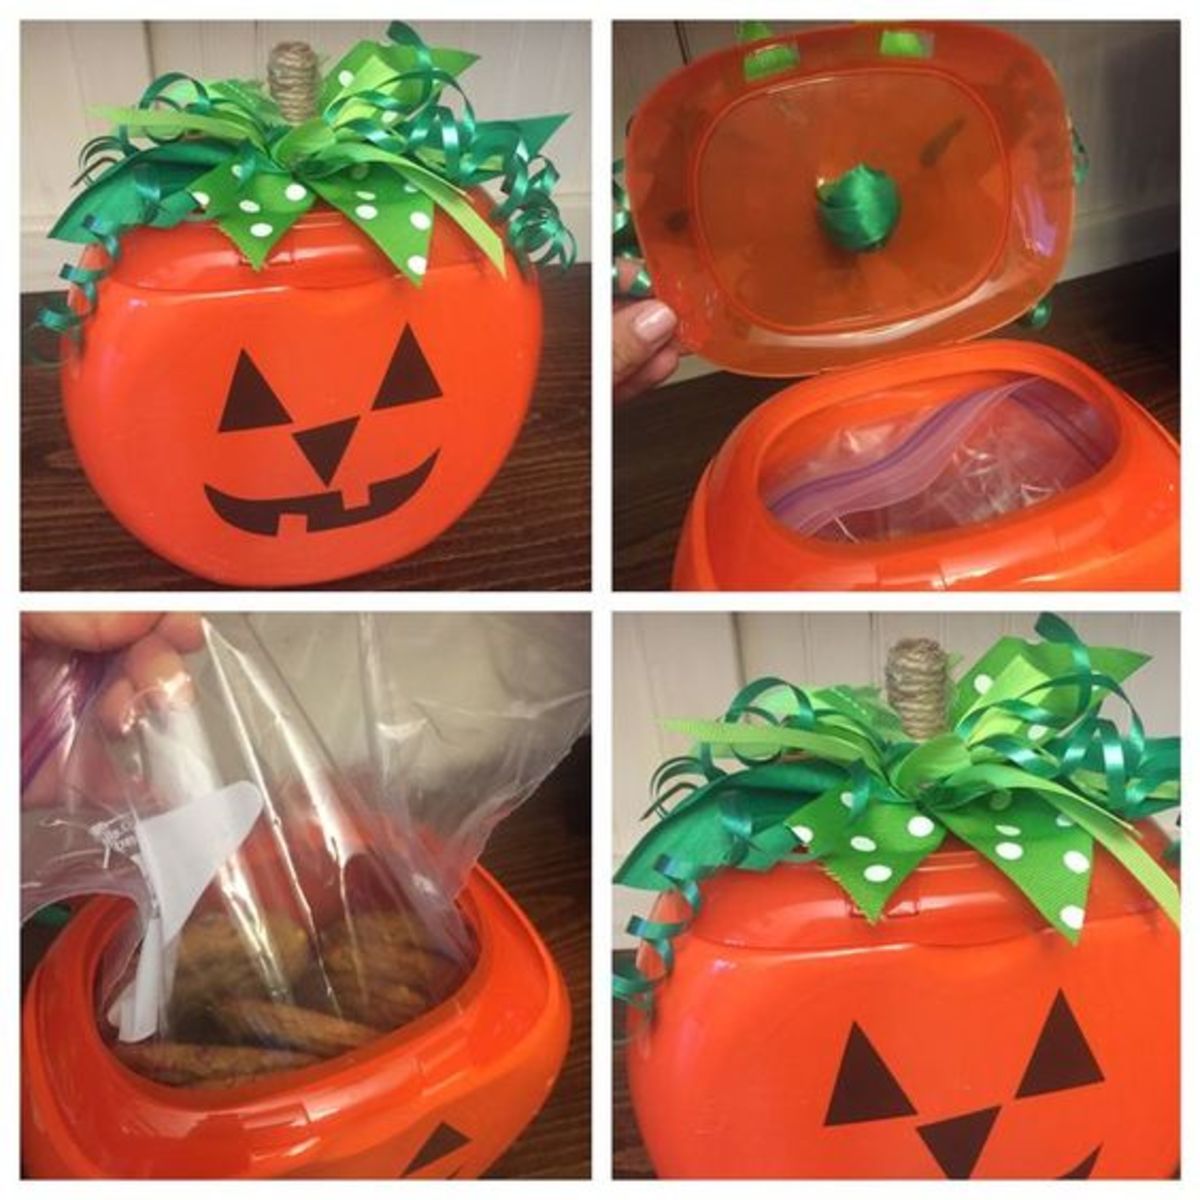 Recycle an old tide pod container into a pumpkin cookie jar! Place cookies in plastic bag inside. Stick on jack o lantern face. And cut strips of different green ribbon then stick in a twine covered stem through a hole cut in the top and attach with 